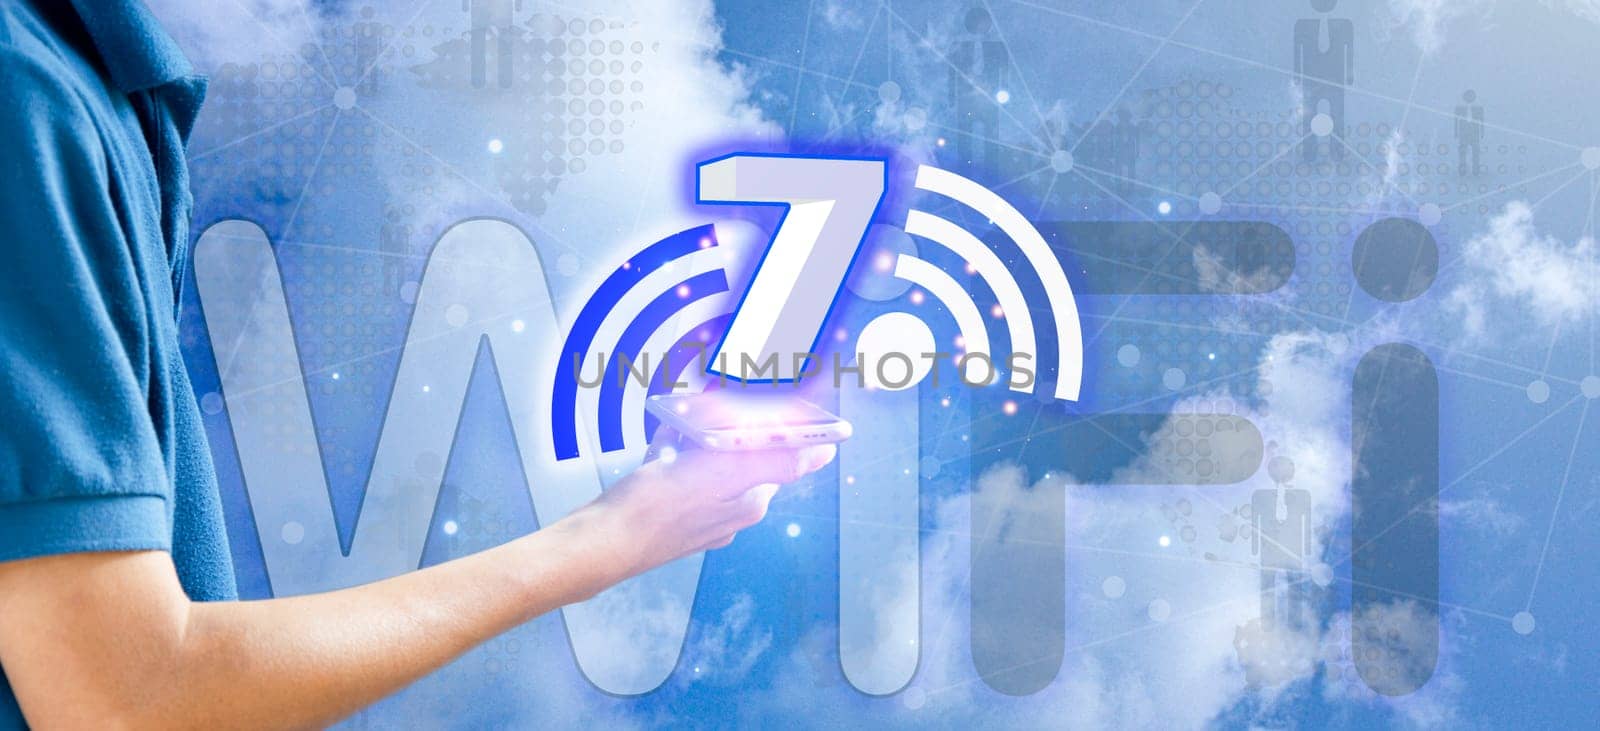 Concept of Wi-Fi 7 or Wi-Fi 7 development, high-speed connection by boonruen